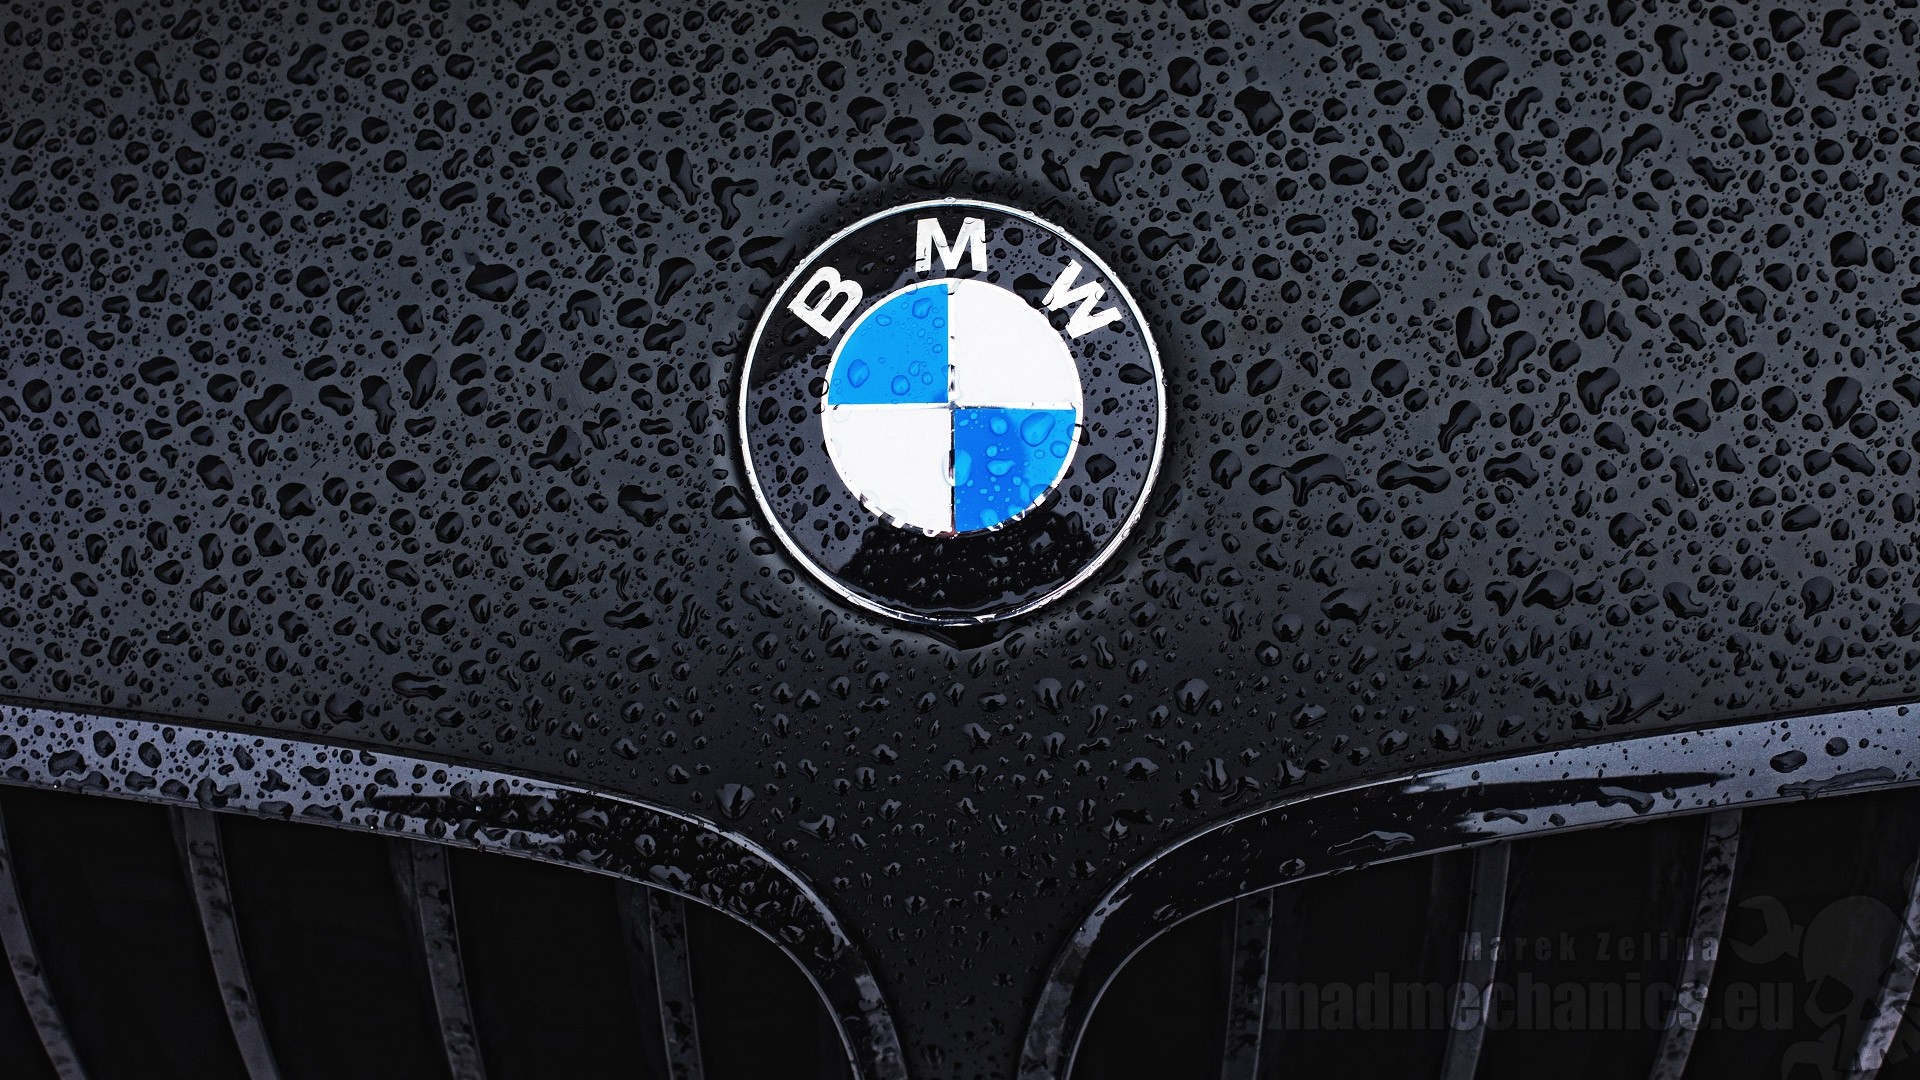 Best BMW Wallpapers For Desktop Tablets in HD For Download 1920x1080